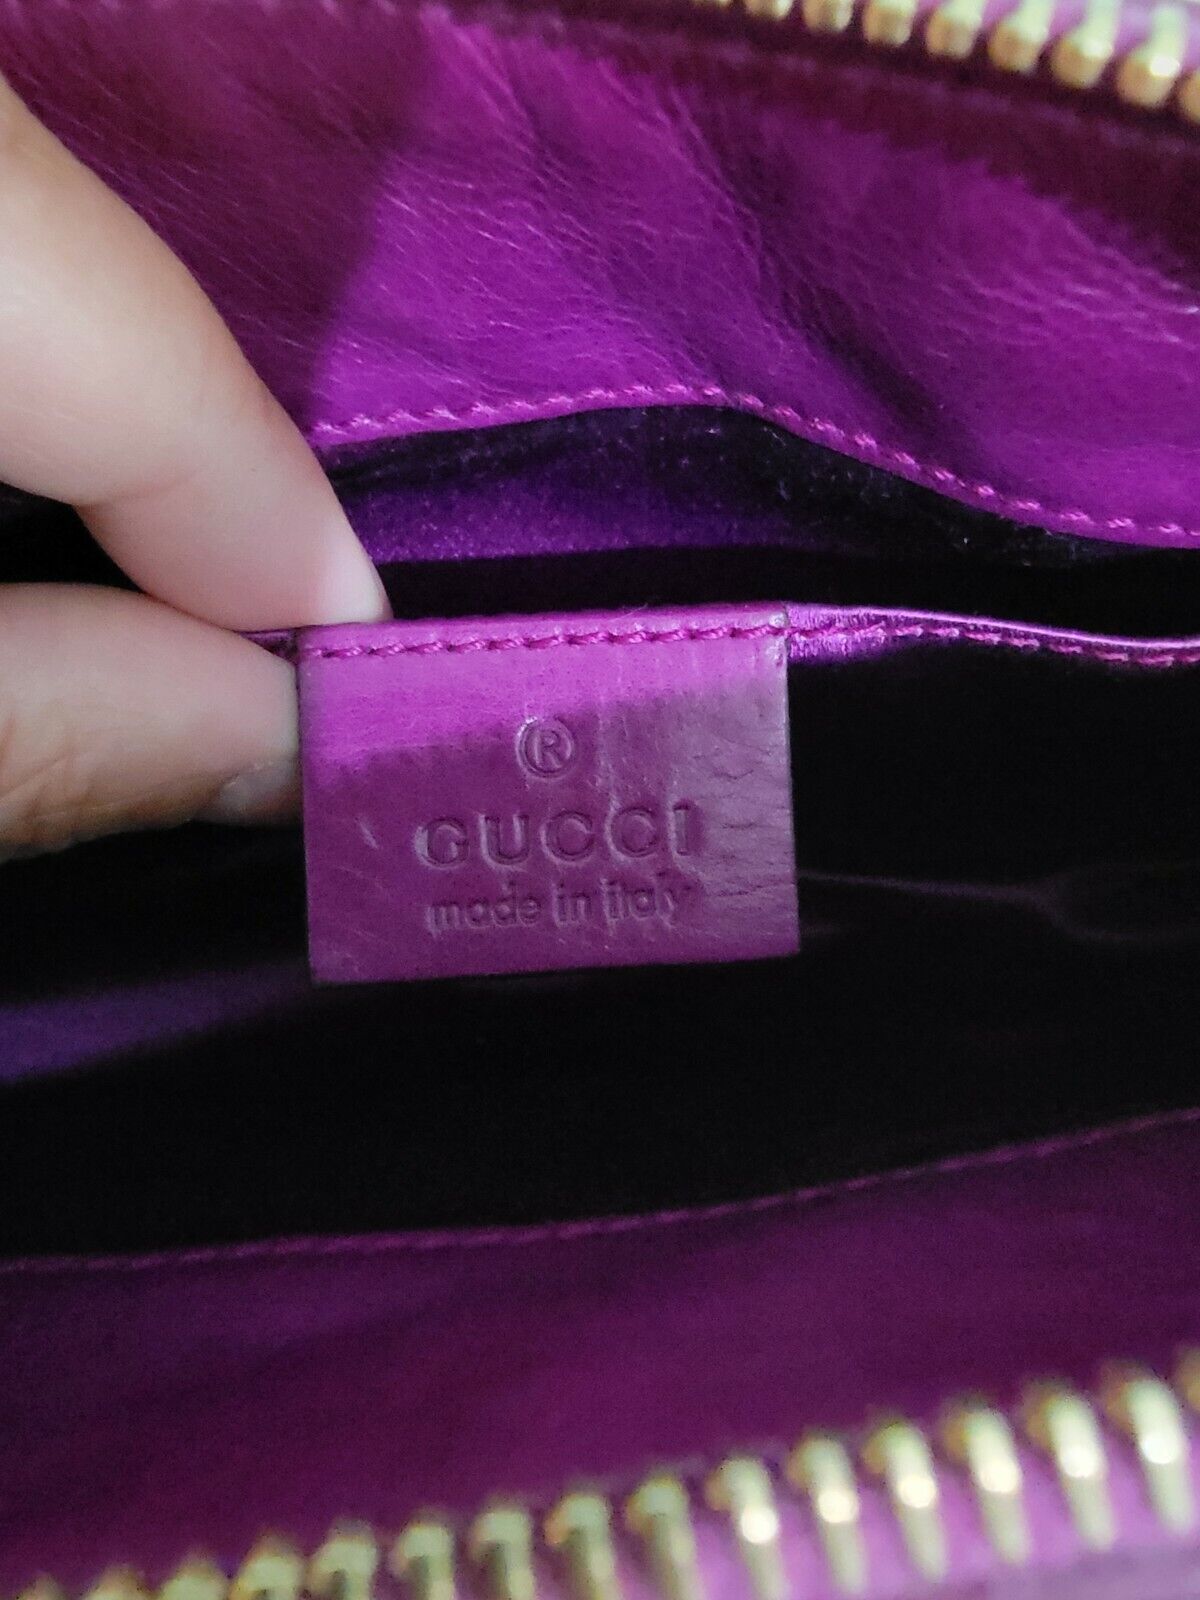 PURPLE, PATENT LEATHER GUCCI HYSTERIA GOLD MEDALL… - image 5